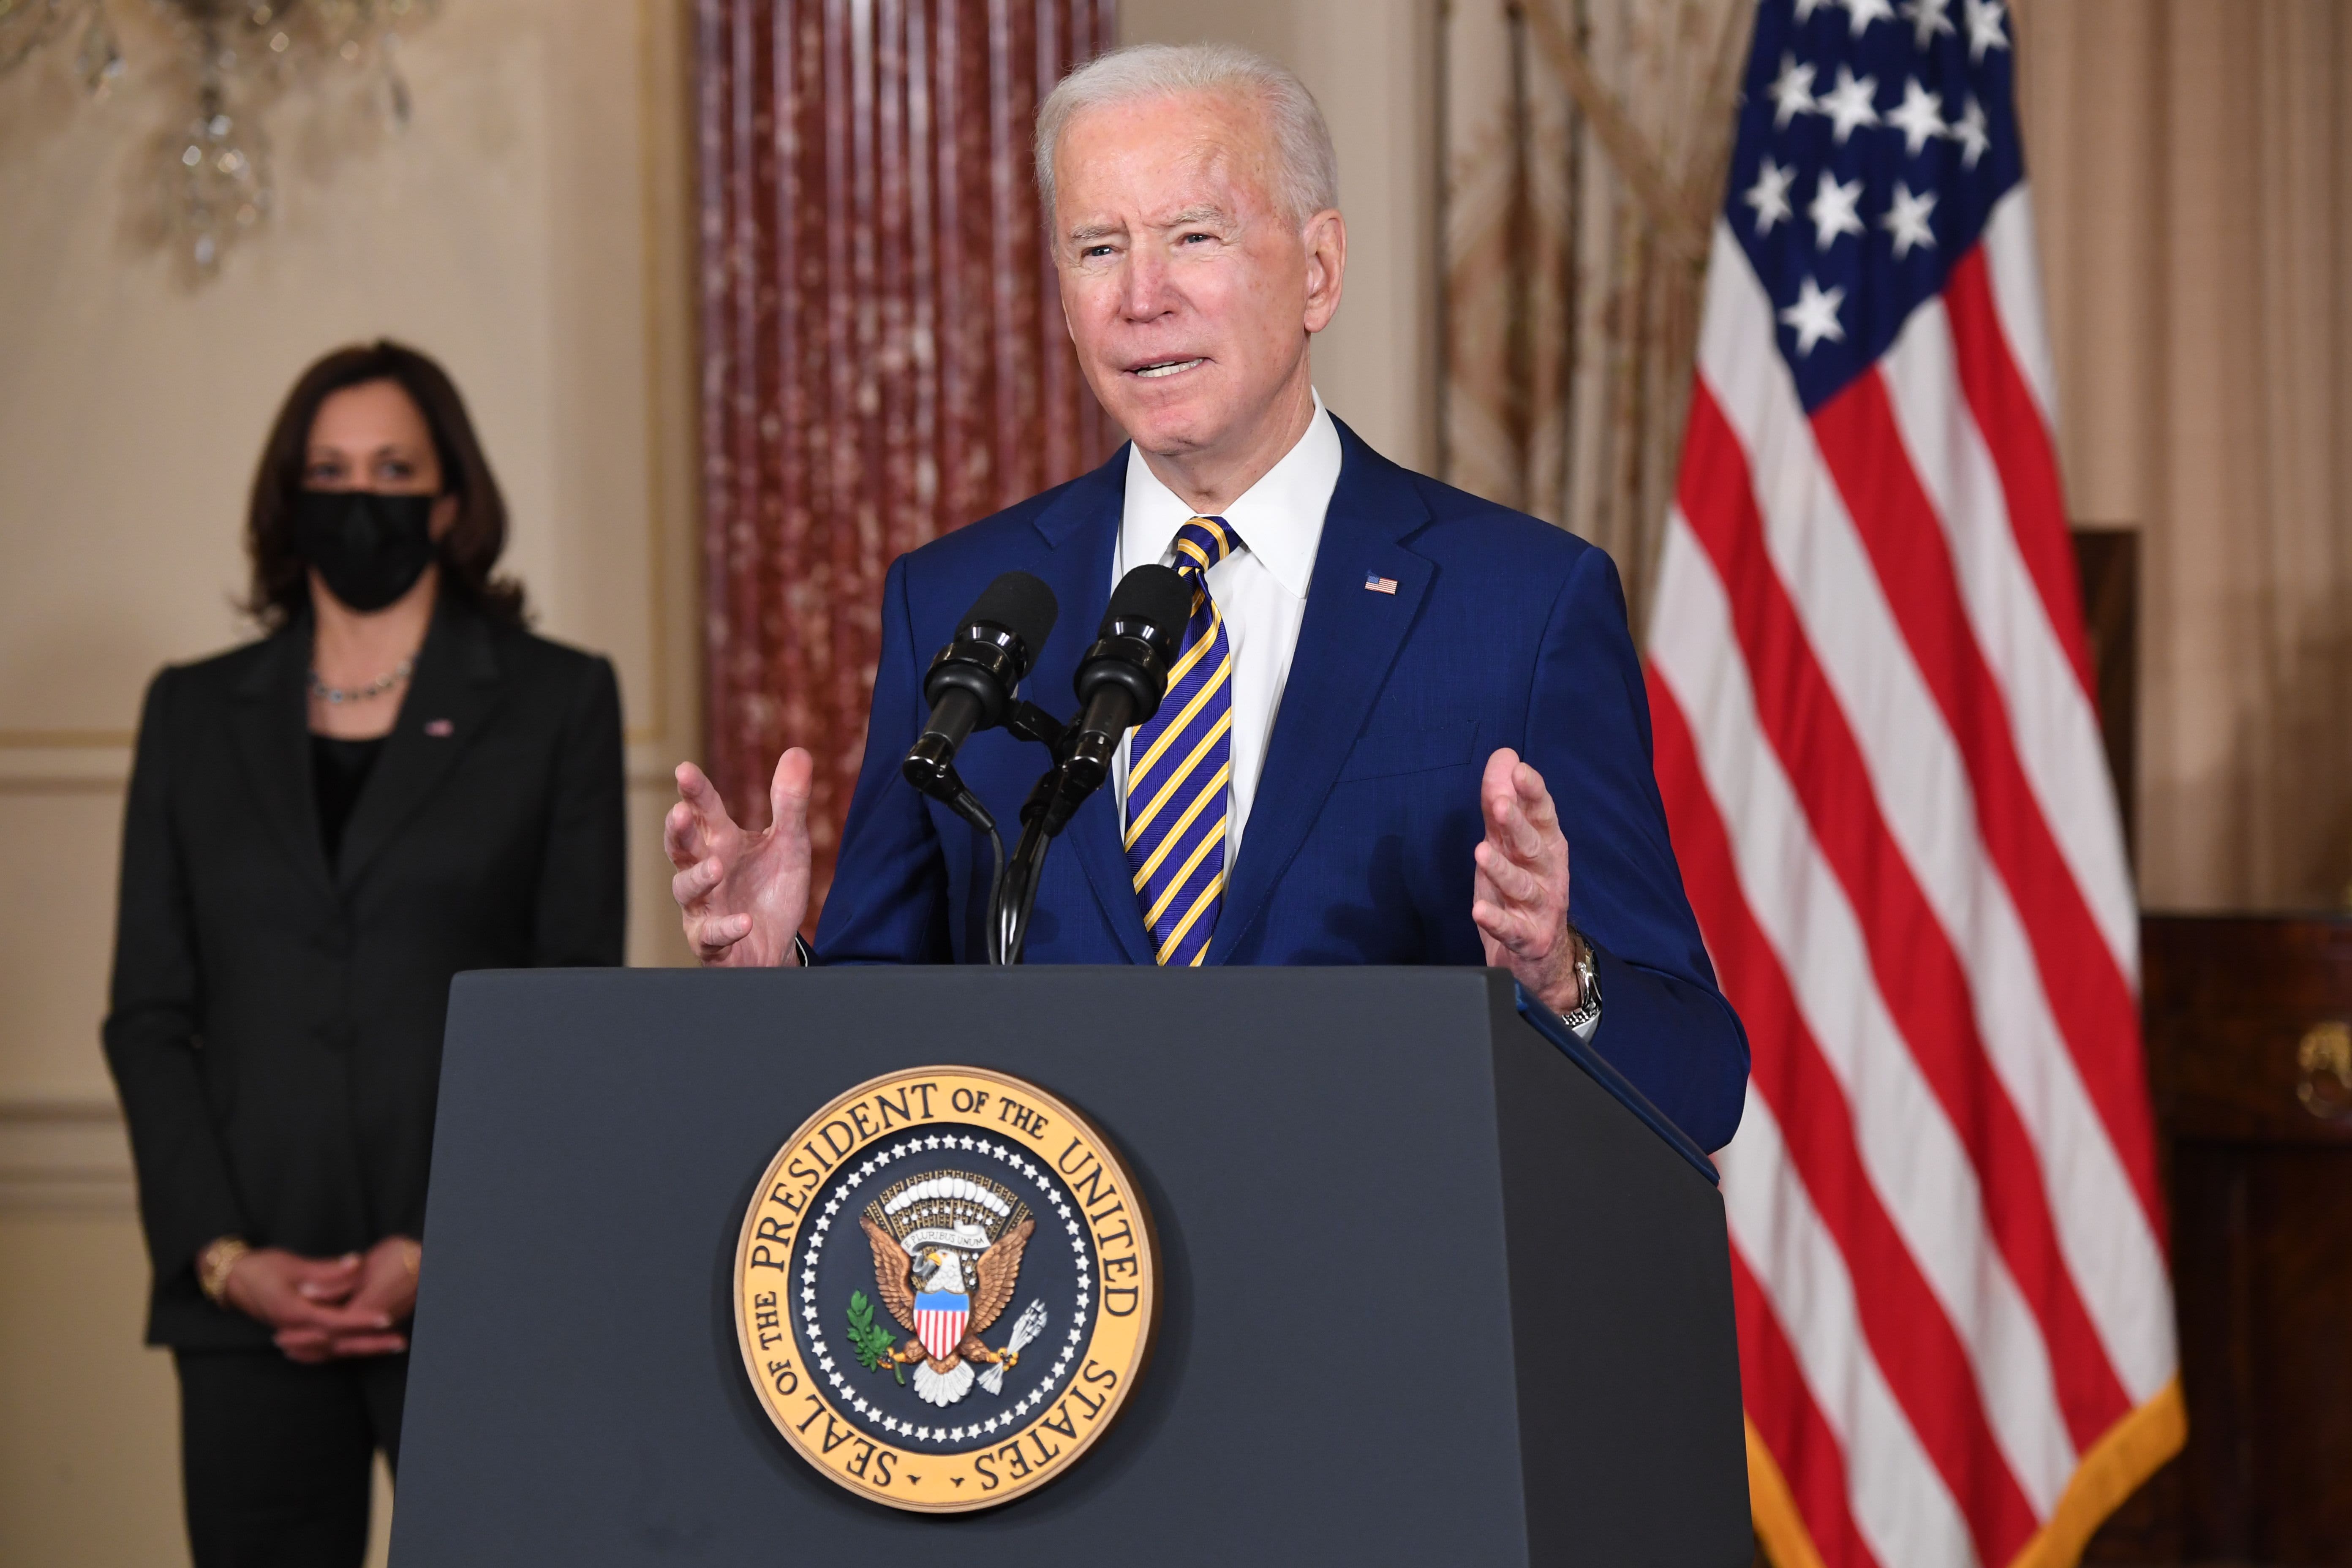 Biden says the United States will not hesitate to increase the cost to Russia